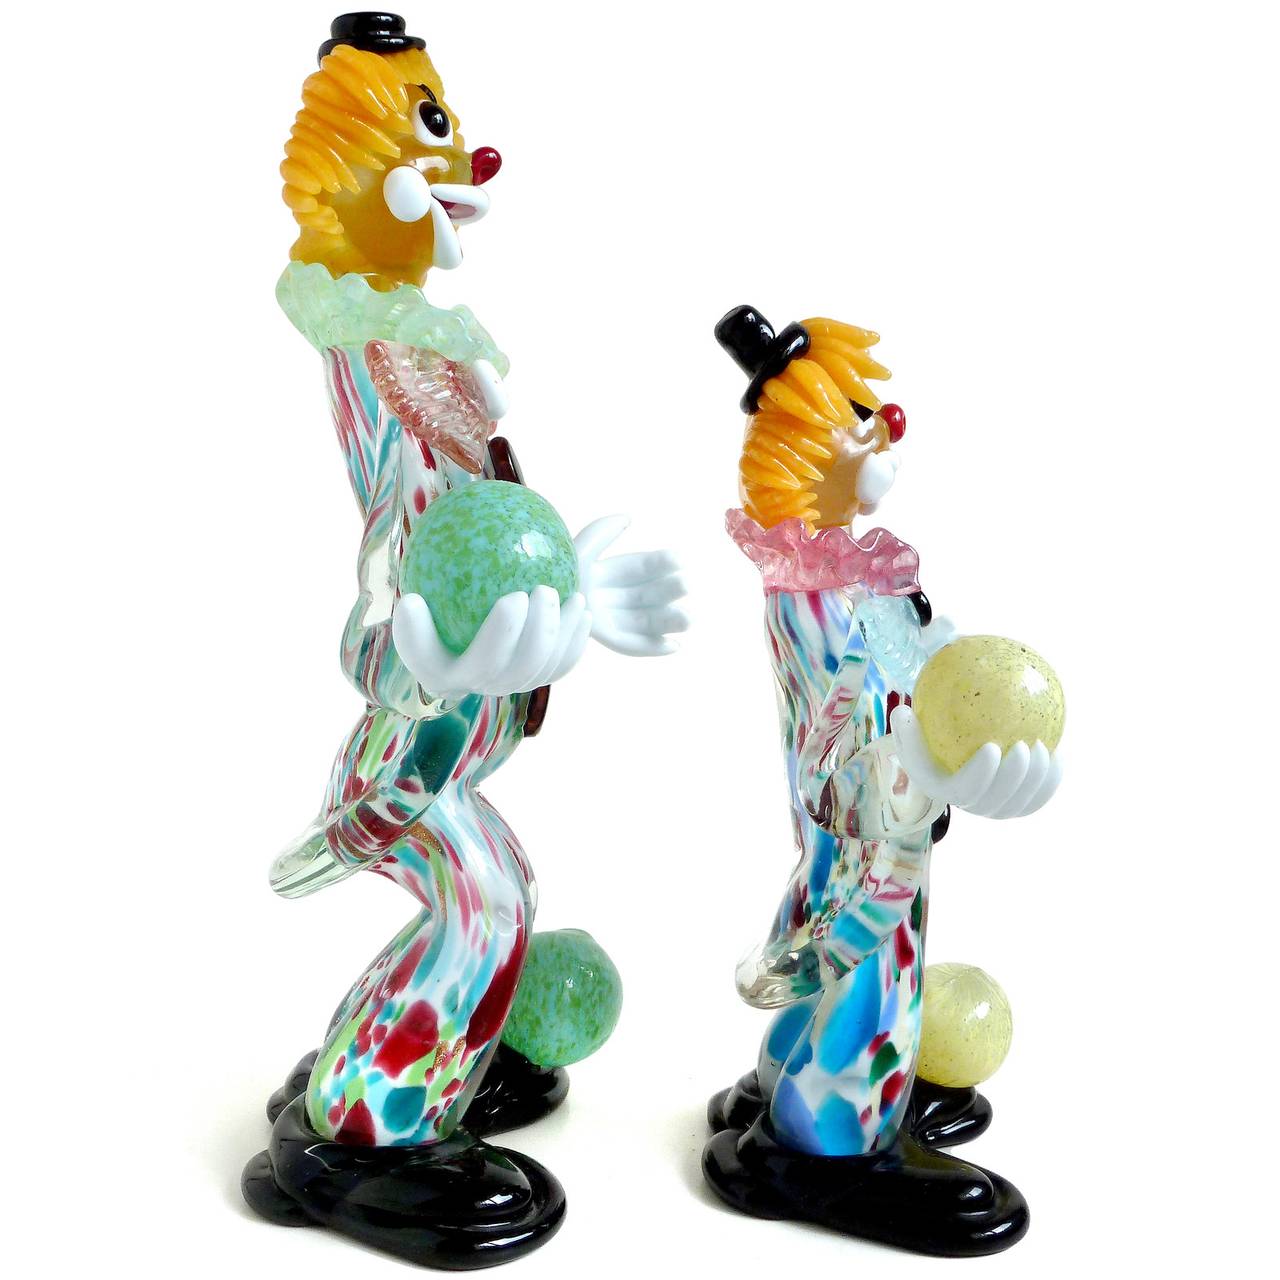 FREE Shipping Worldwide! See details below description.

Very cute Murano hand blown, multi-color confetti design, art glass juggling clown pair. The figures are juggling 2 balls each, one in hand and another on the foot. Referred to as 